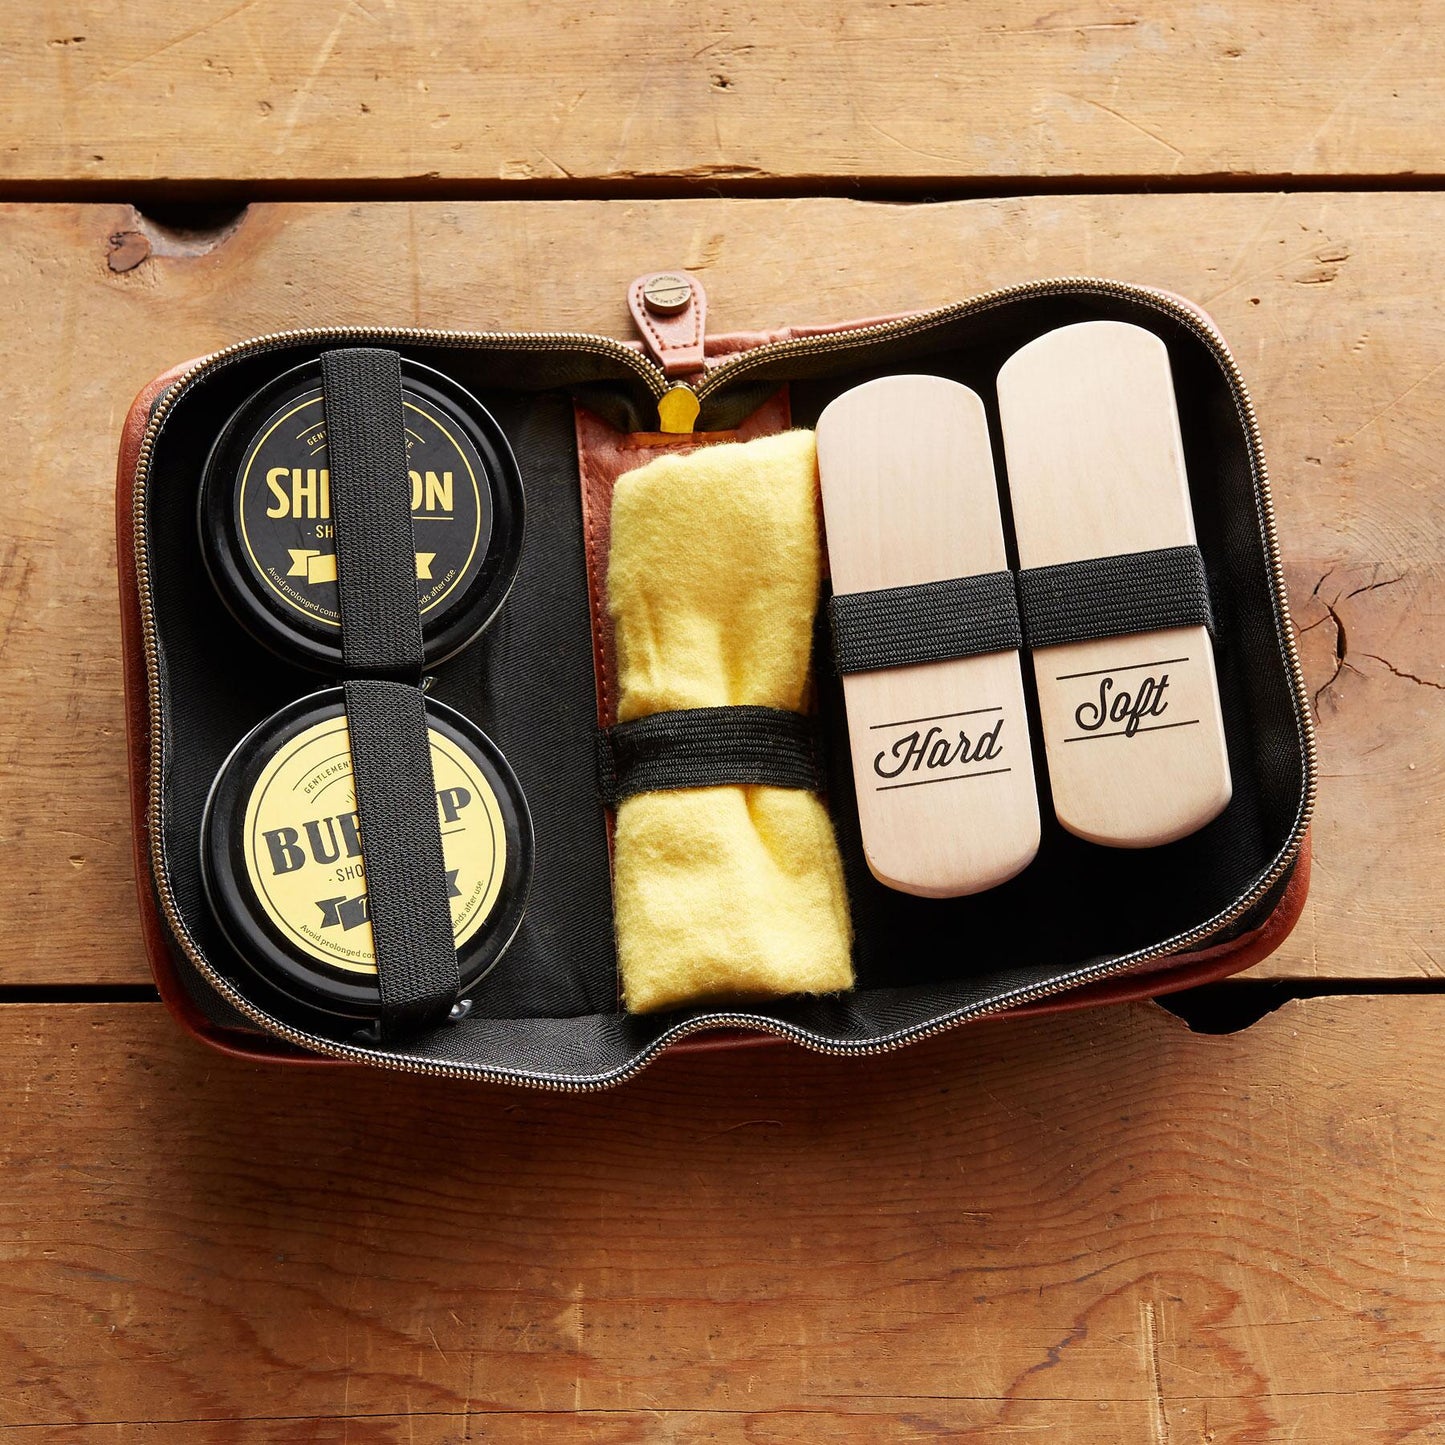 the shoe shine kit displayed in the open case on wood planks